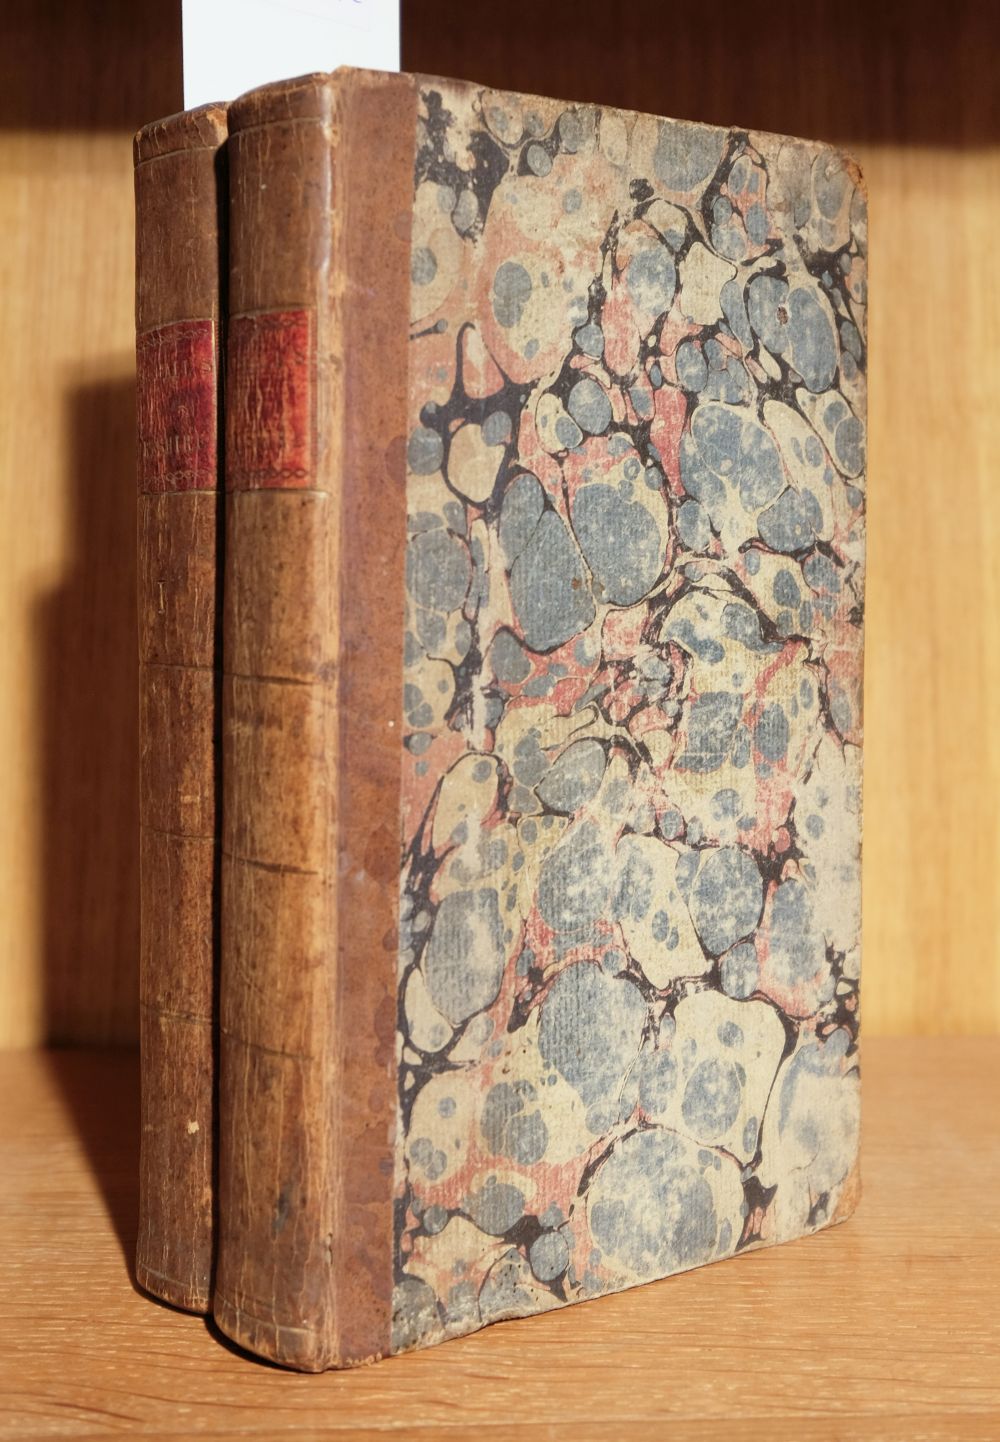 Cannon (Richard). Historical Record of the Connaught Rangers, 1st edition, 1838, & others